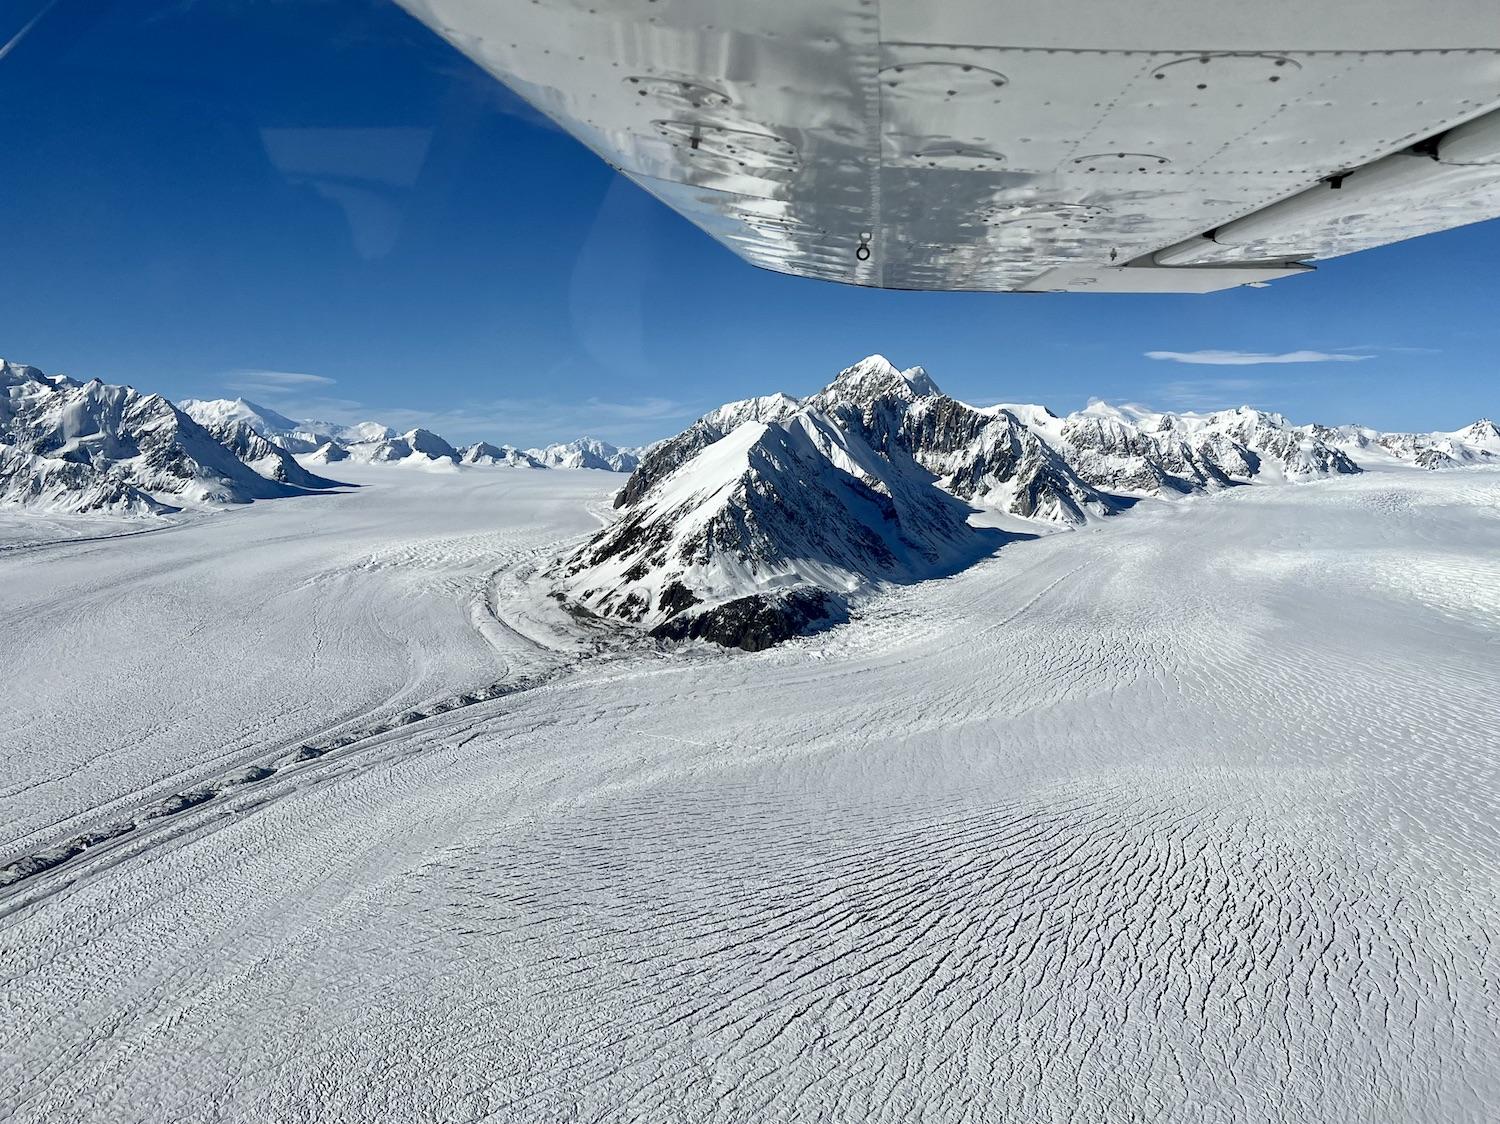 The view from a Kluane flightseeing tour with Icefield Discovery.